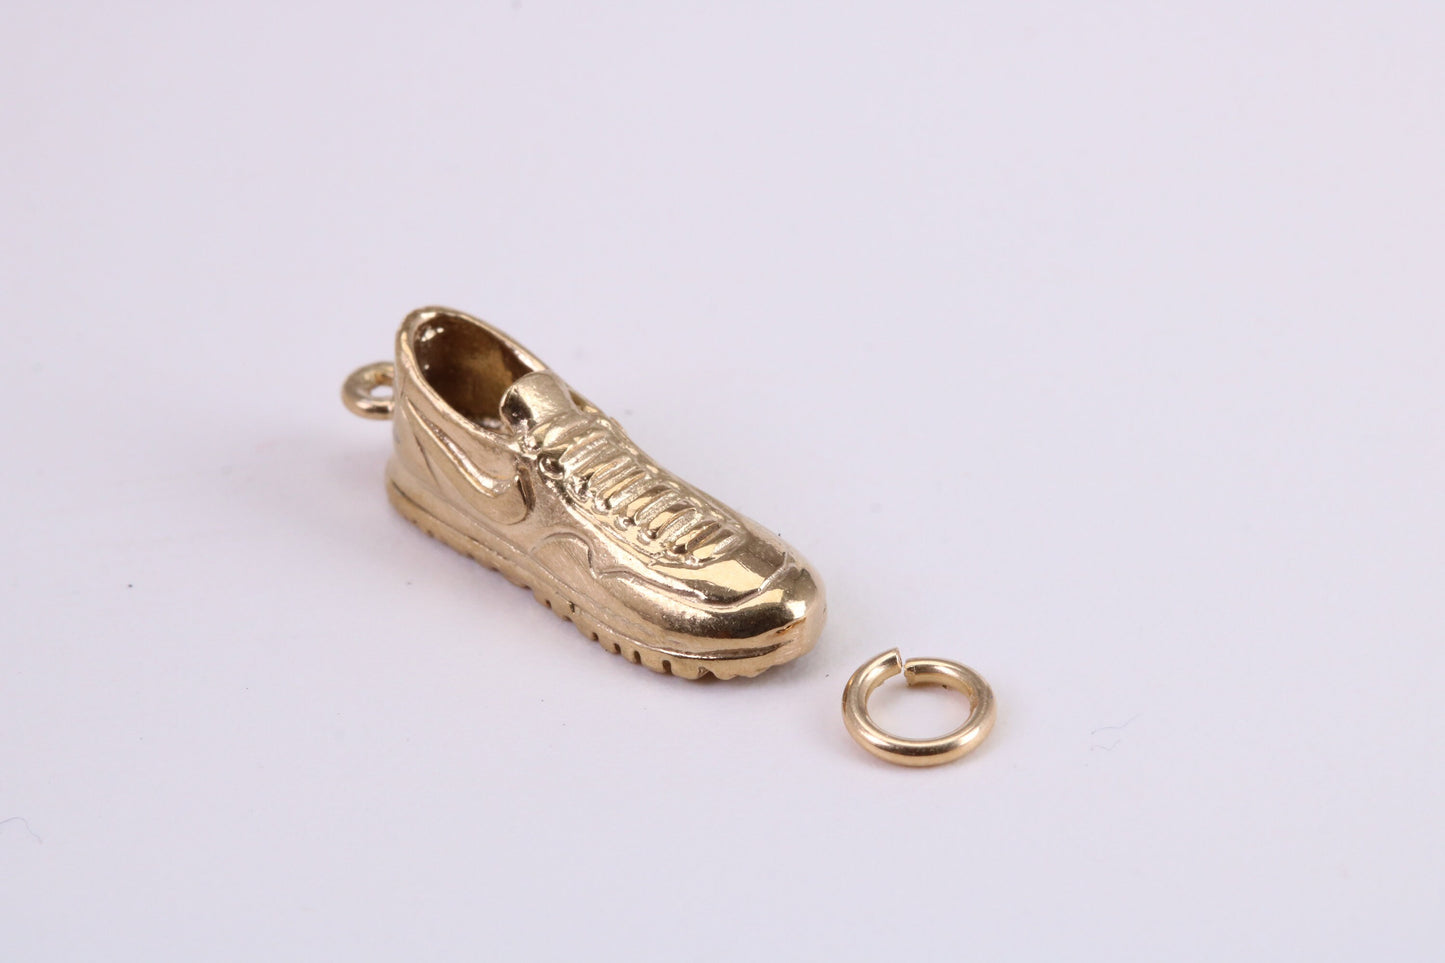 Trainer Shoe Charm, Traditional Charm, Made from Solid Yellow Gold, British Hallmarked, Complete with Attachment Link